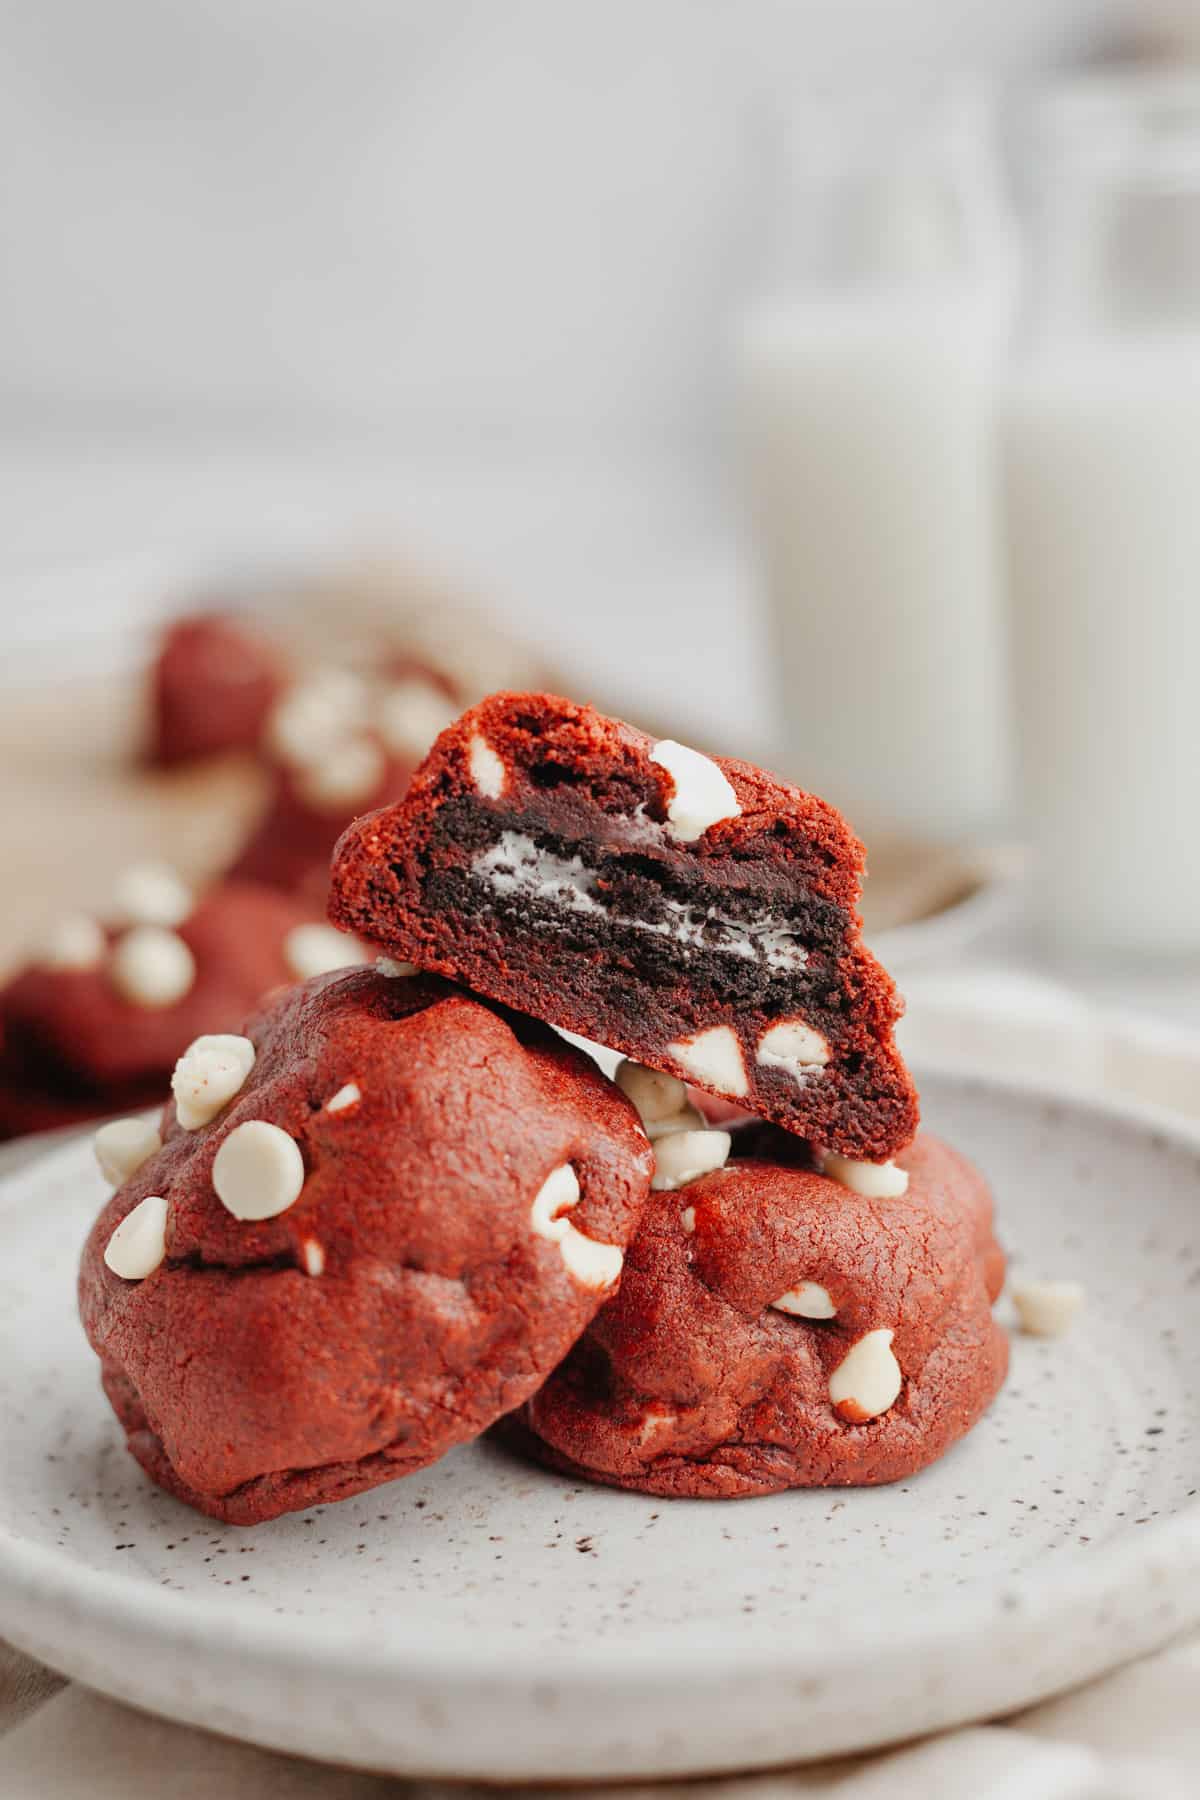 Three red velvet cookies on a plate, one is cut in half showing it is stuffed with an Oreo.